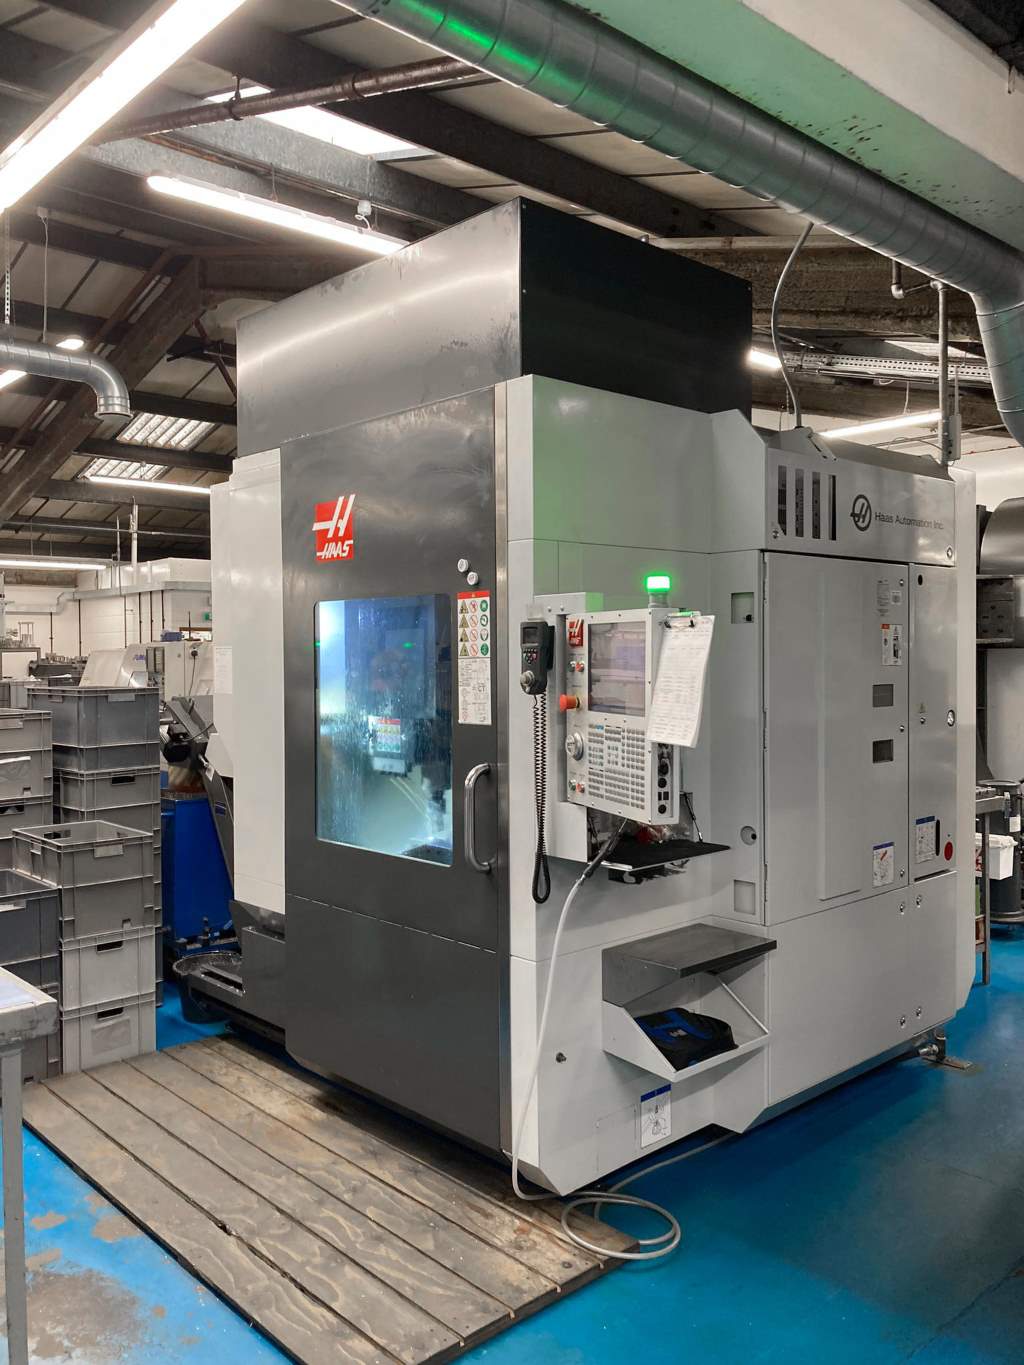 A Haas UMC 500 at Maycast-Nokes